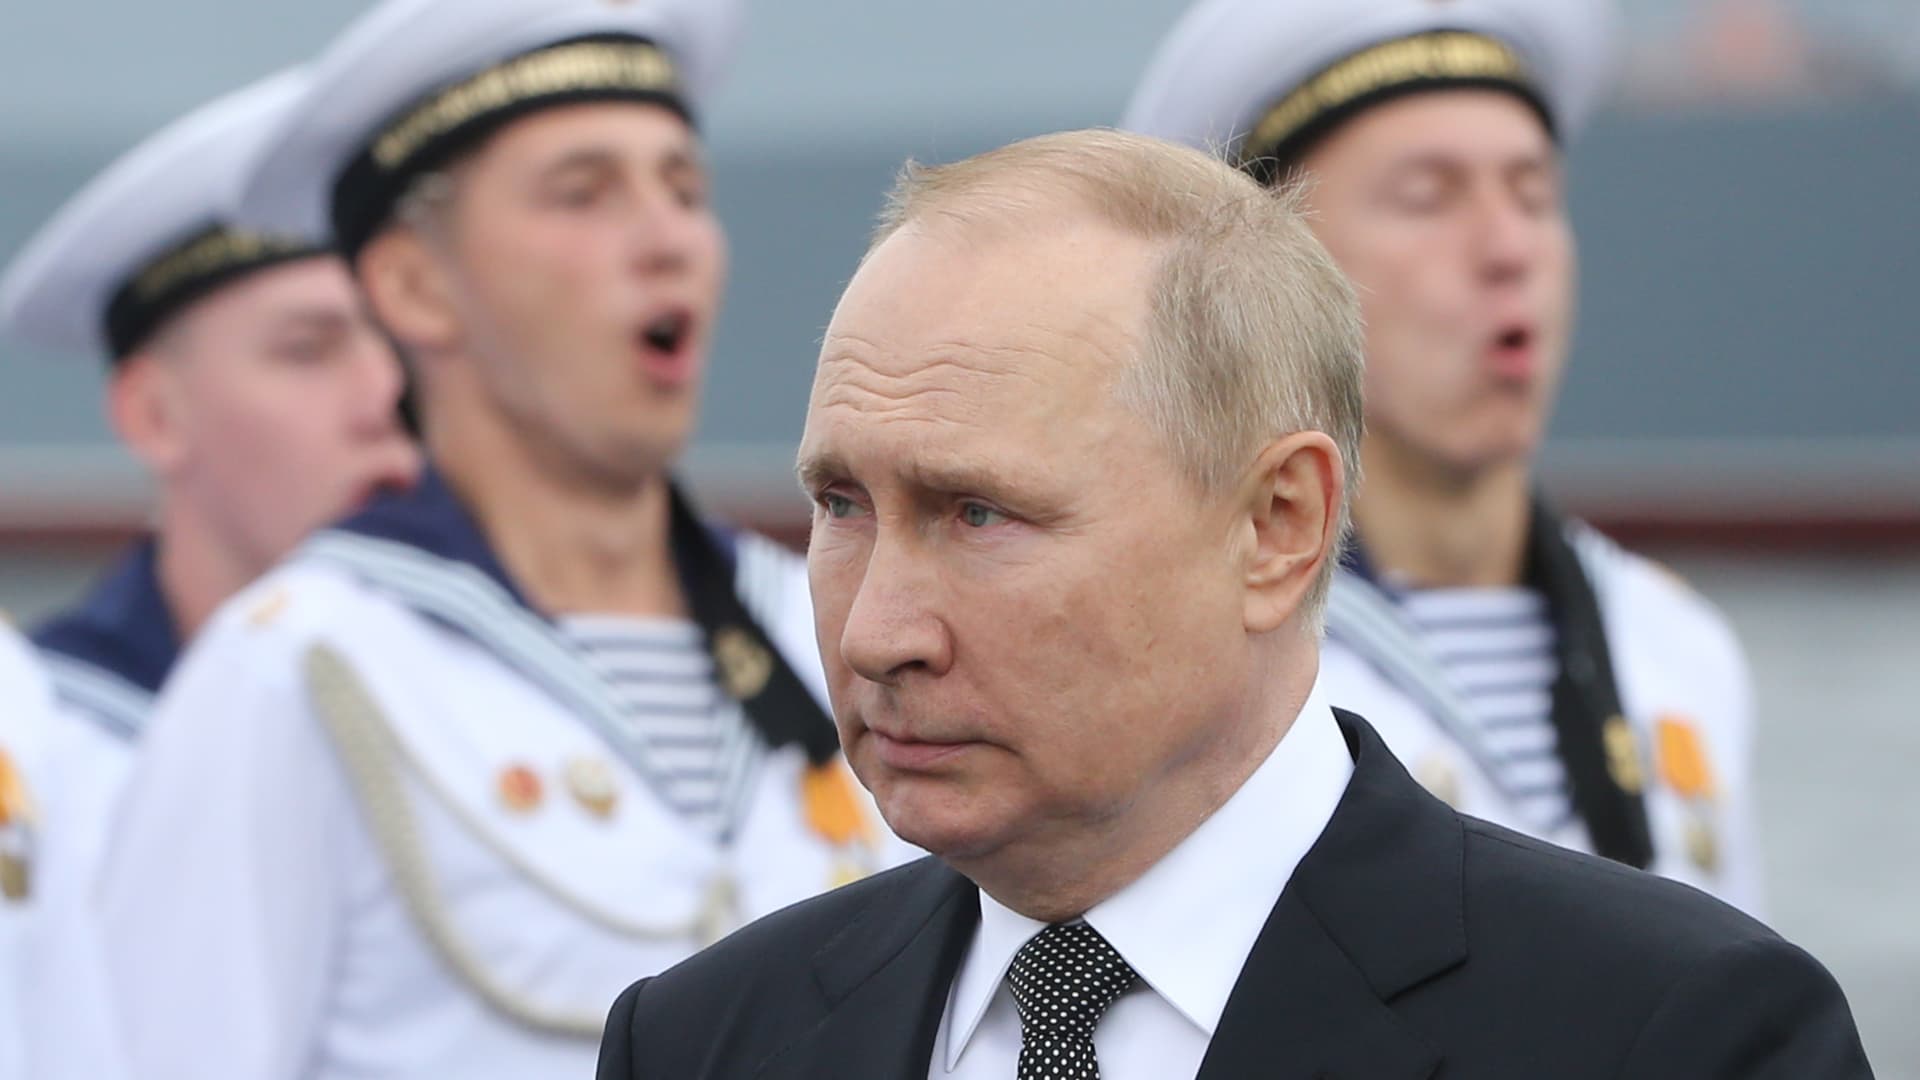 Russian President Vladimir Putin at the Navy Day Parade on July, 31 2022, in St. Petersburg, Russia. Planned Navy Day celebrations in Sevastopol in Russian-annexed Crimea were canceled on Sunday after officials accused Ukraine of carrying out a drone attack on the Black Sea Fleet's headquarters there, injuring five people.